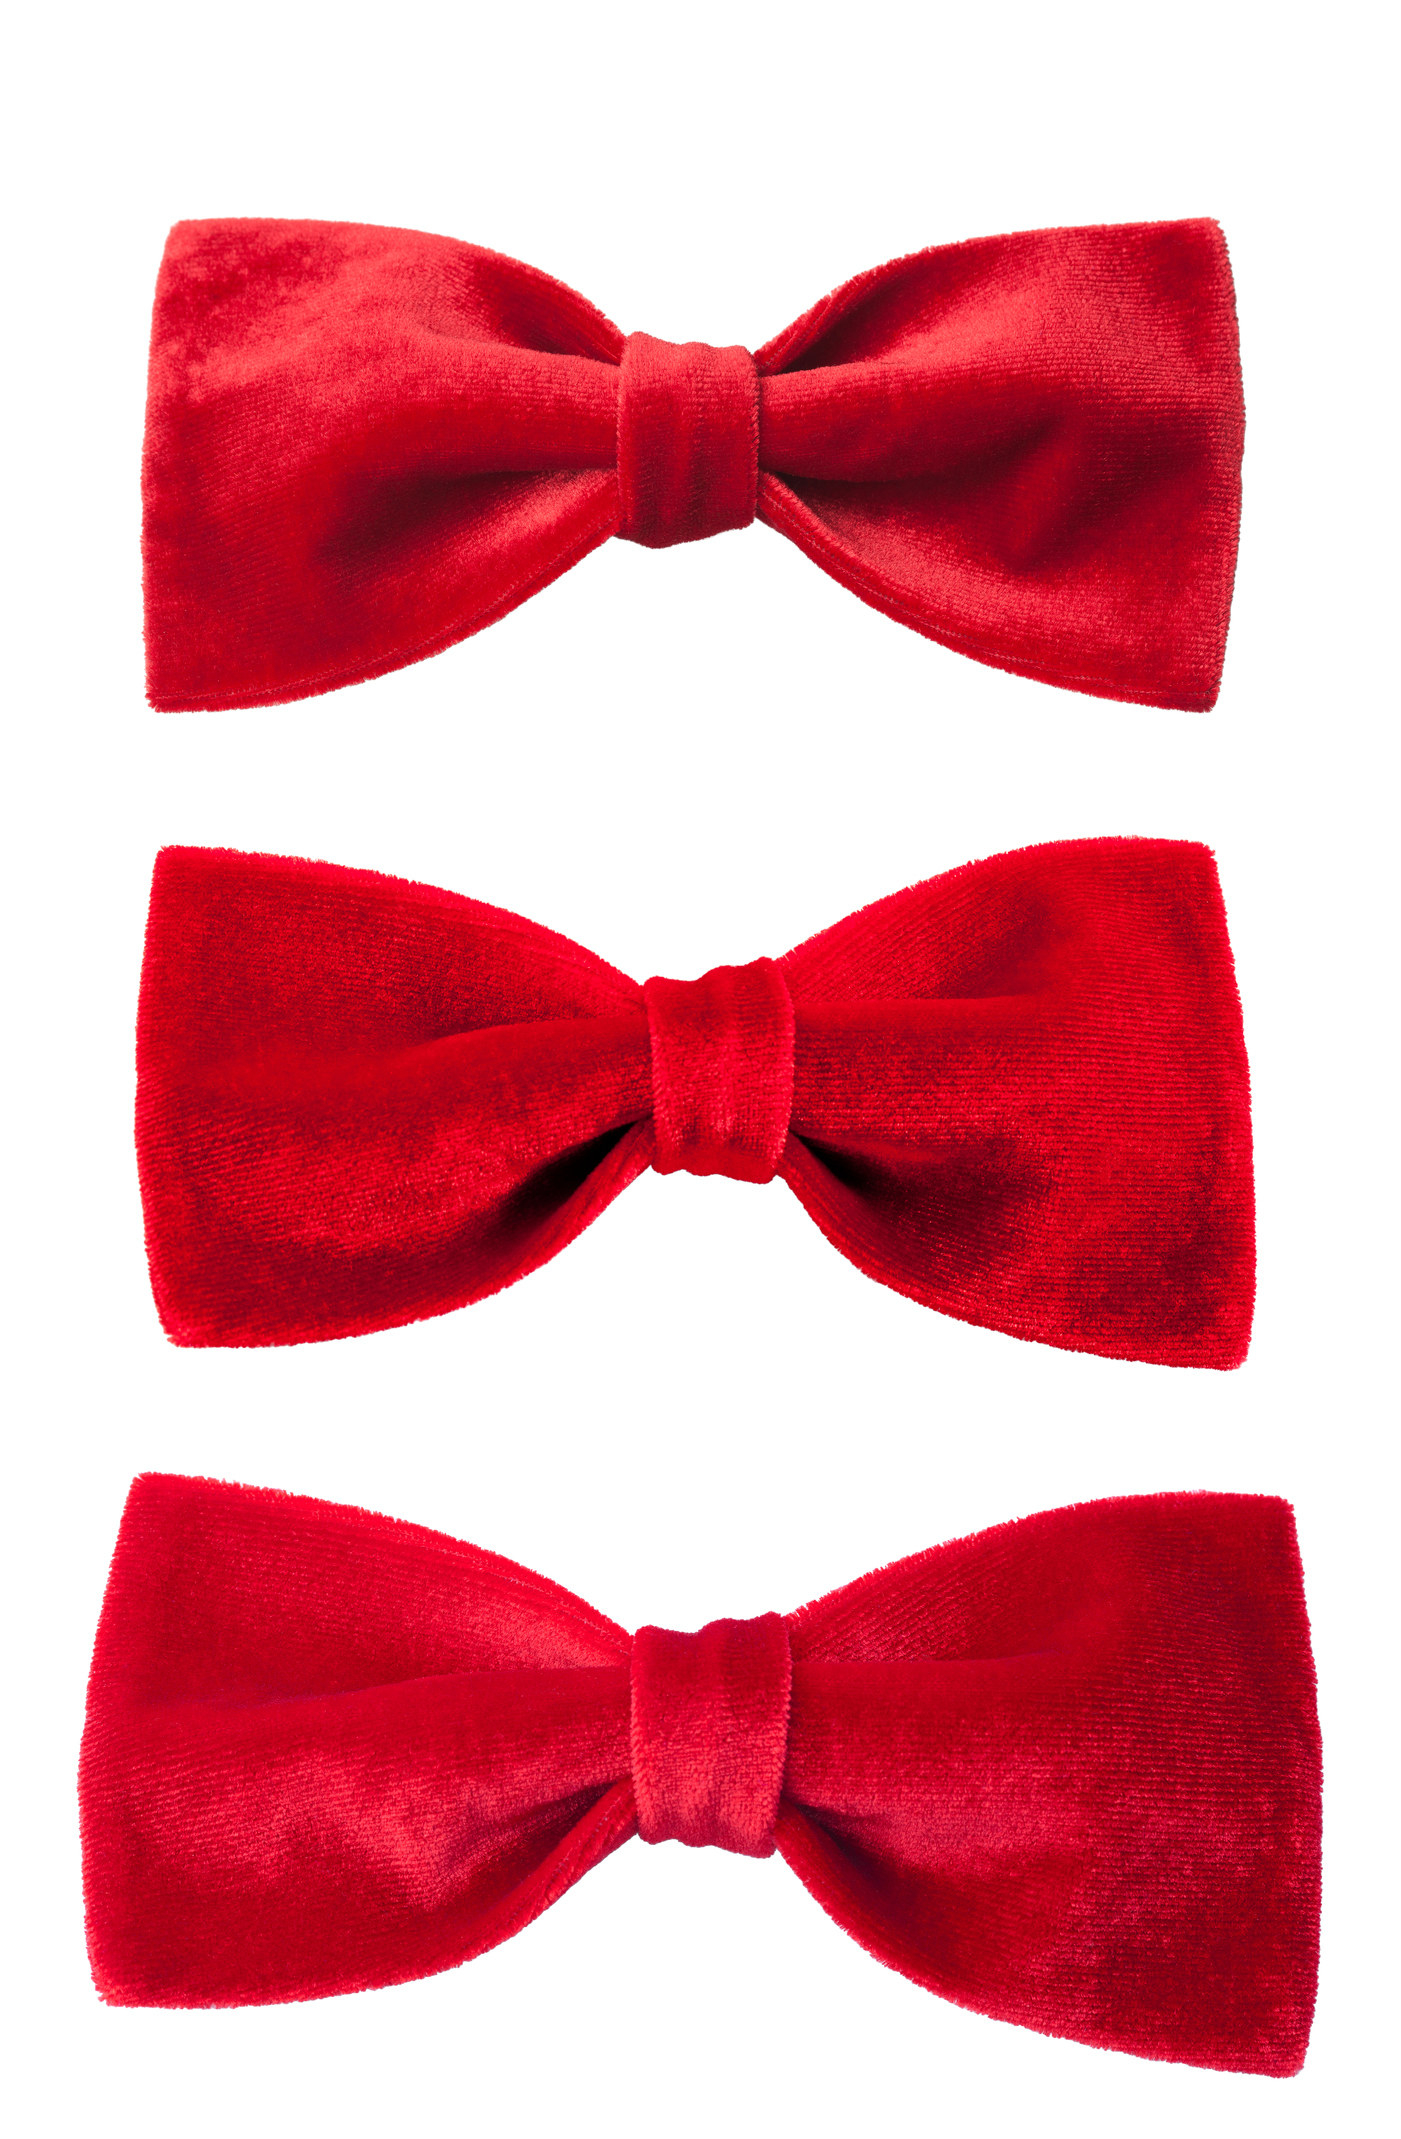 Very fine red bow ties isolated on a white background